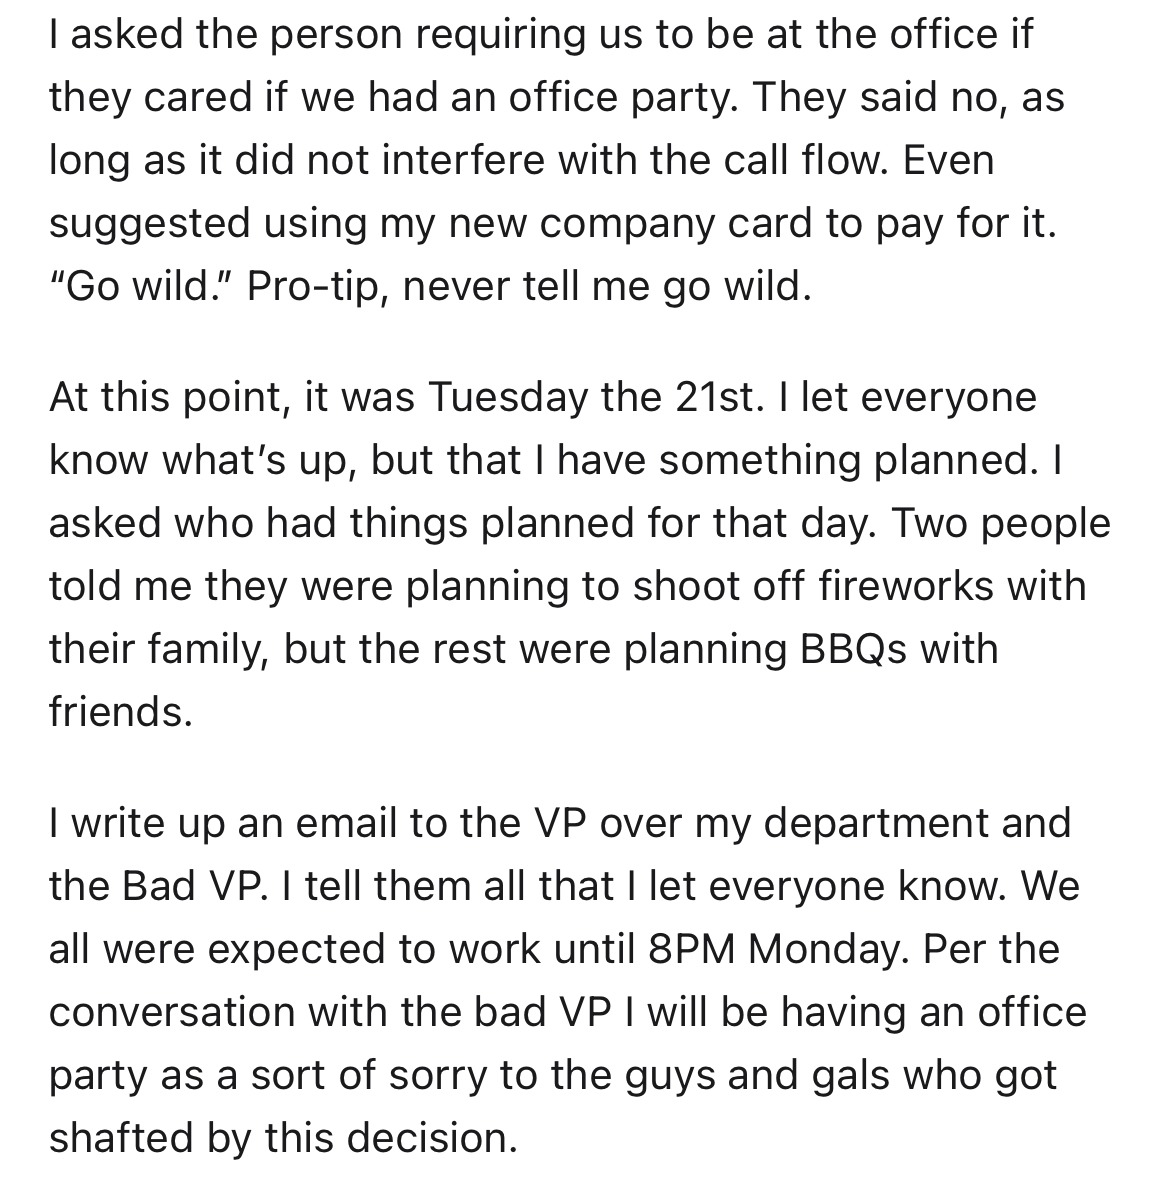 employees throw $6k 4th of July party at work -document - I asked the person requiring us to be at the office if they cared if we had an office party. They said no, as long as it did not interfere with the call flow. Even suggested using my new company ca